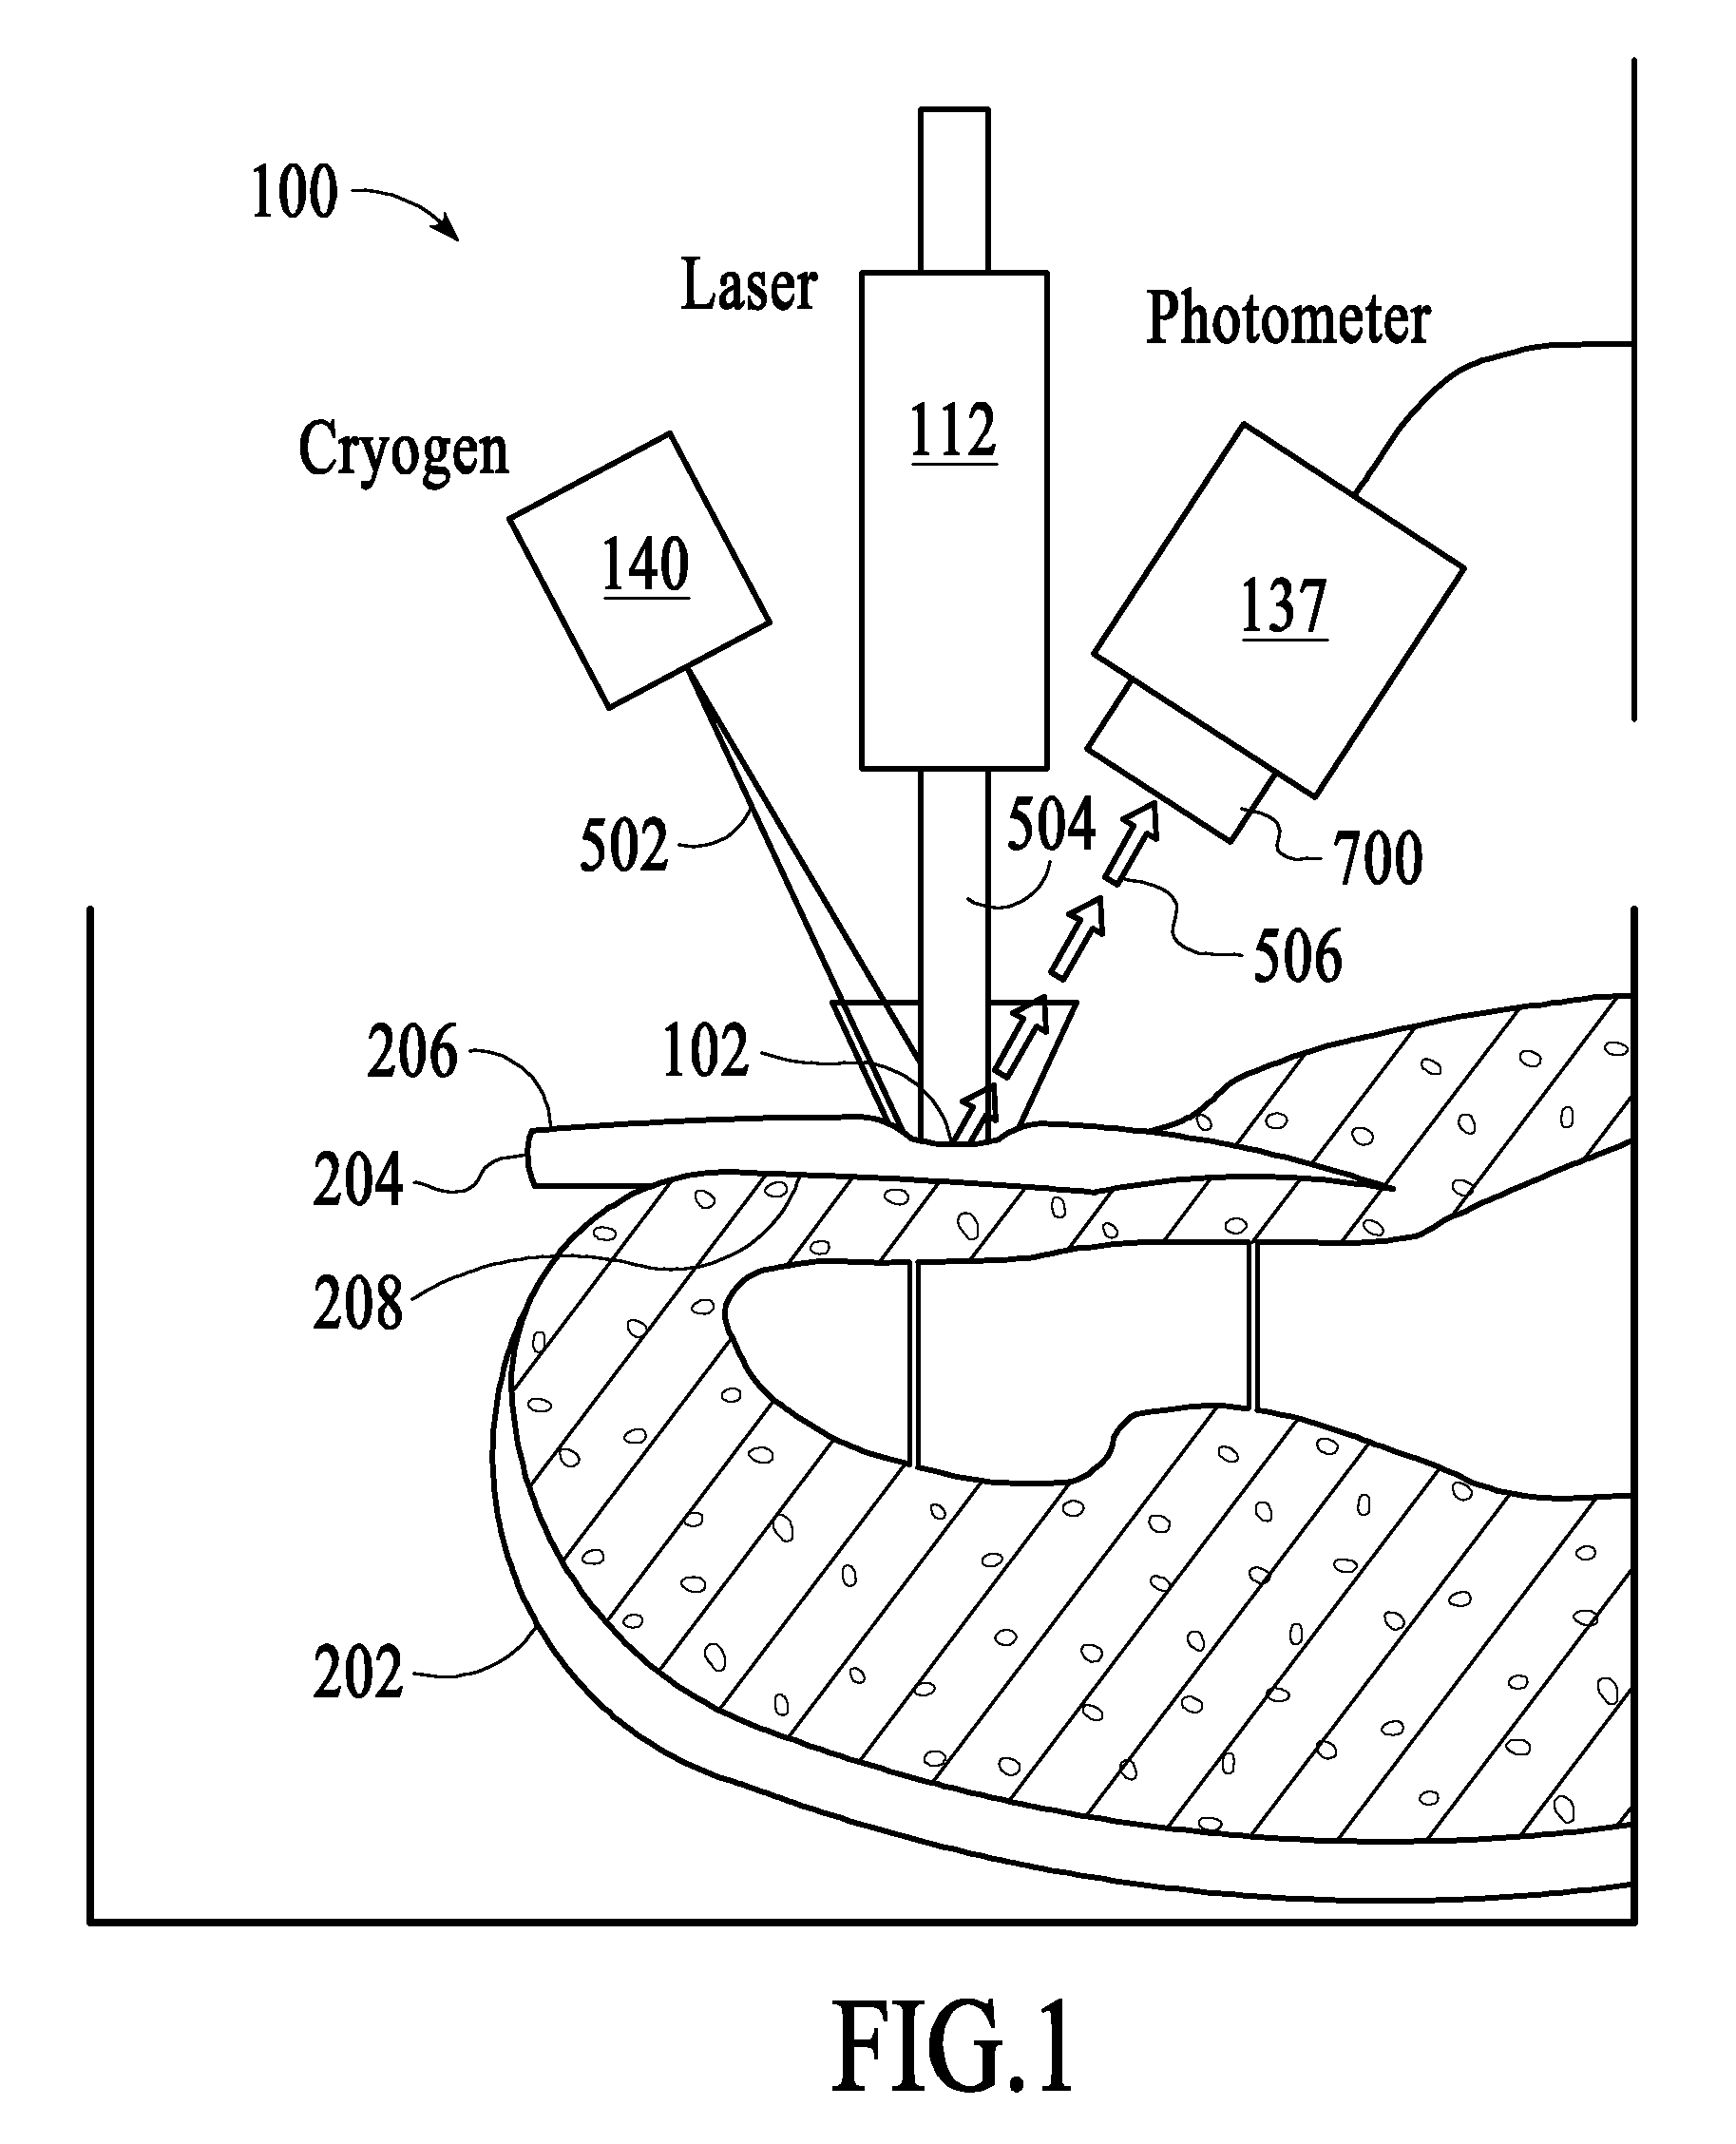 Method for treatment of fingernail and toenail microbial infections using infrared laser heating and low pressure